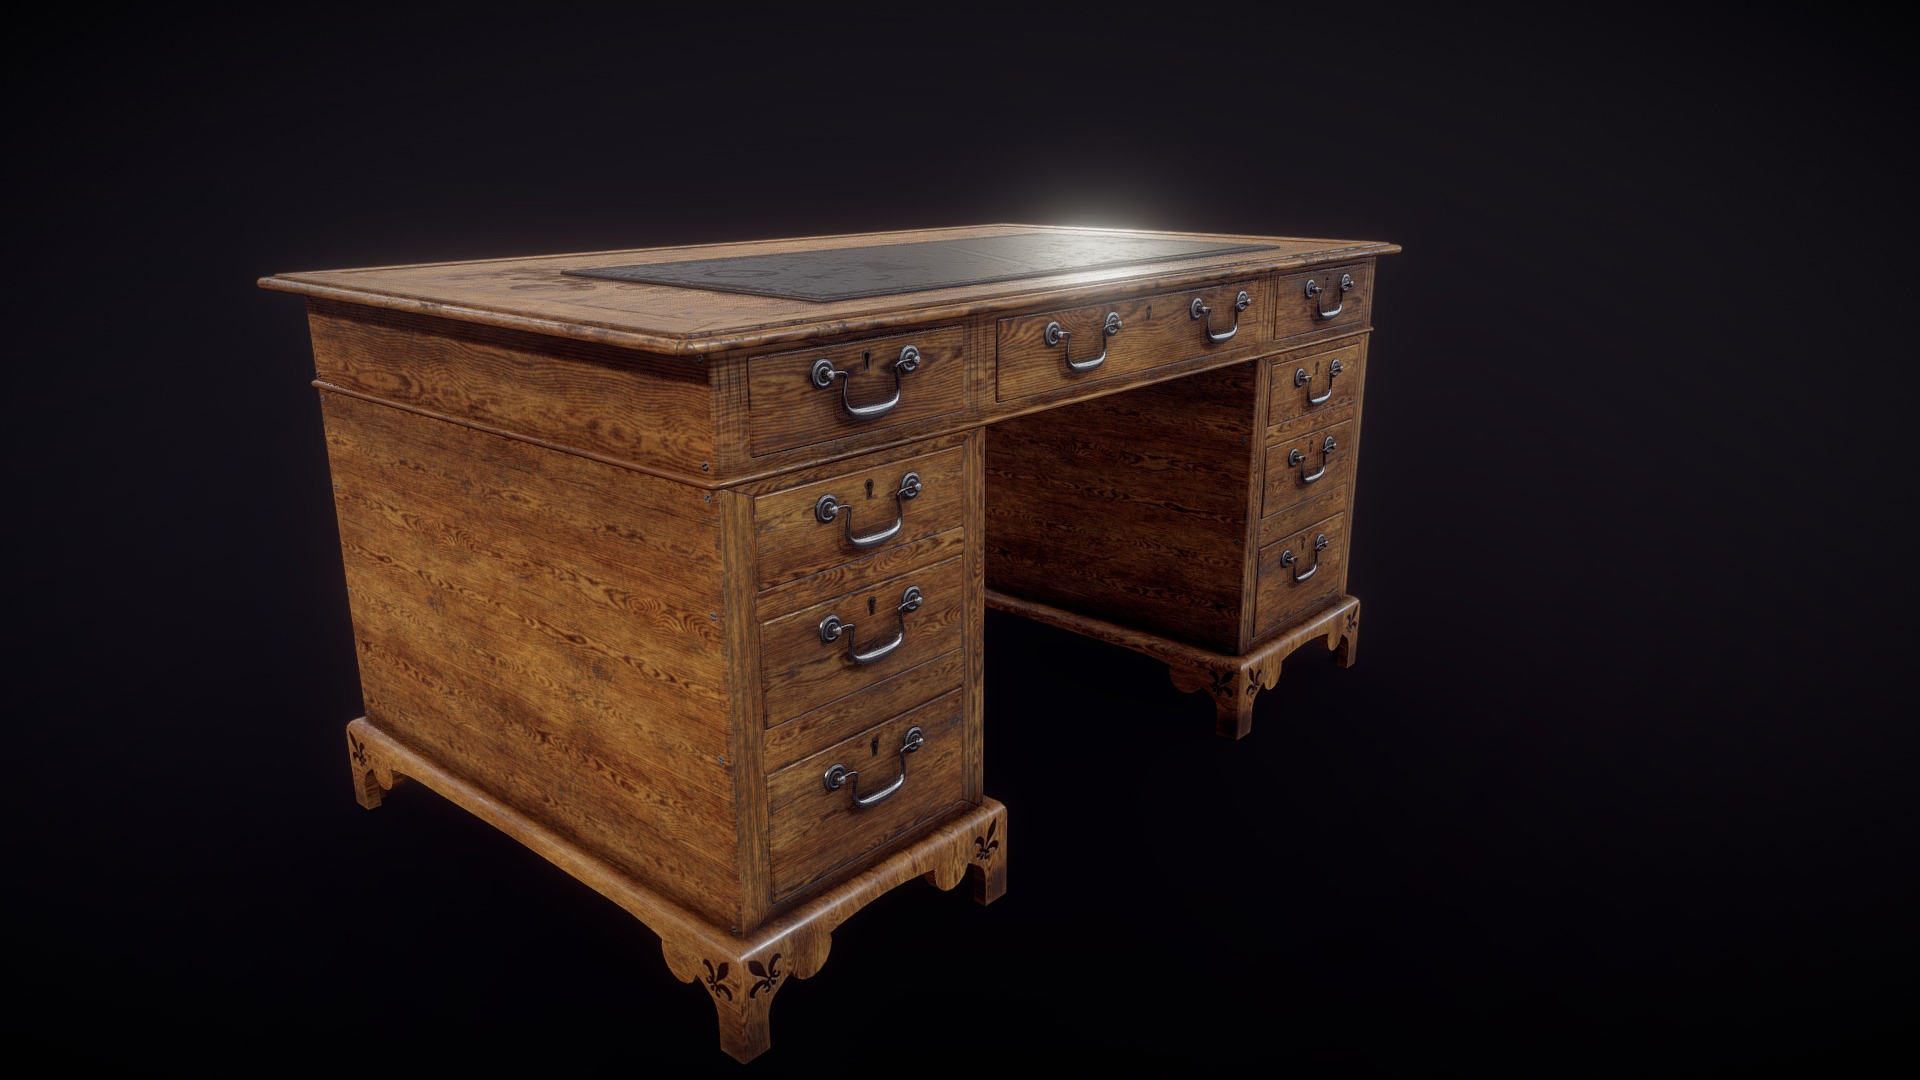 3D model Wooden Table - This is a 3D model of the Wooden Table. The 3D model is about a wooden chest with drawers.